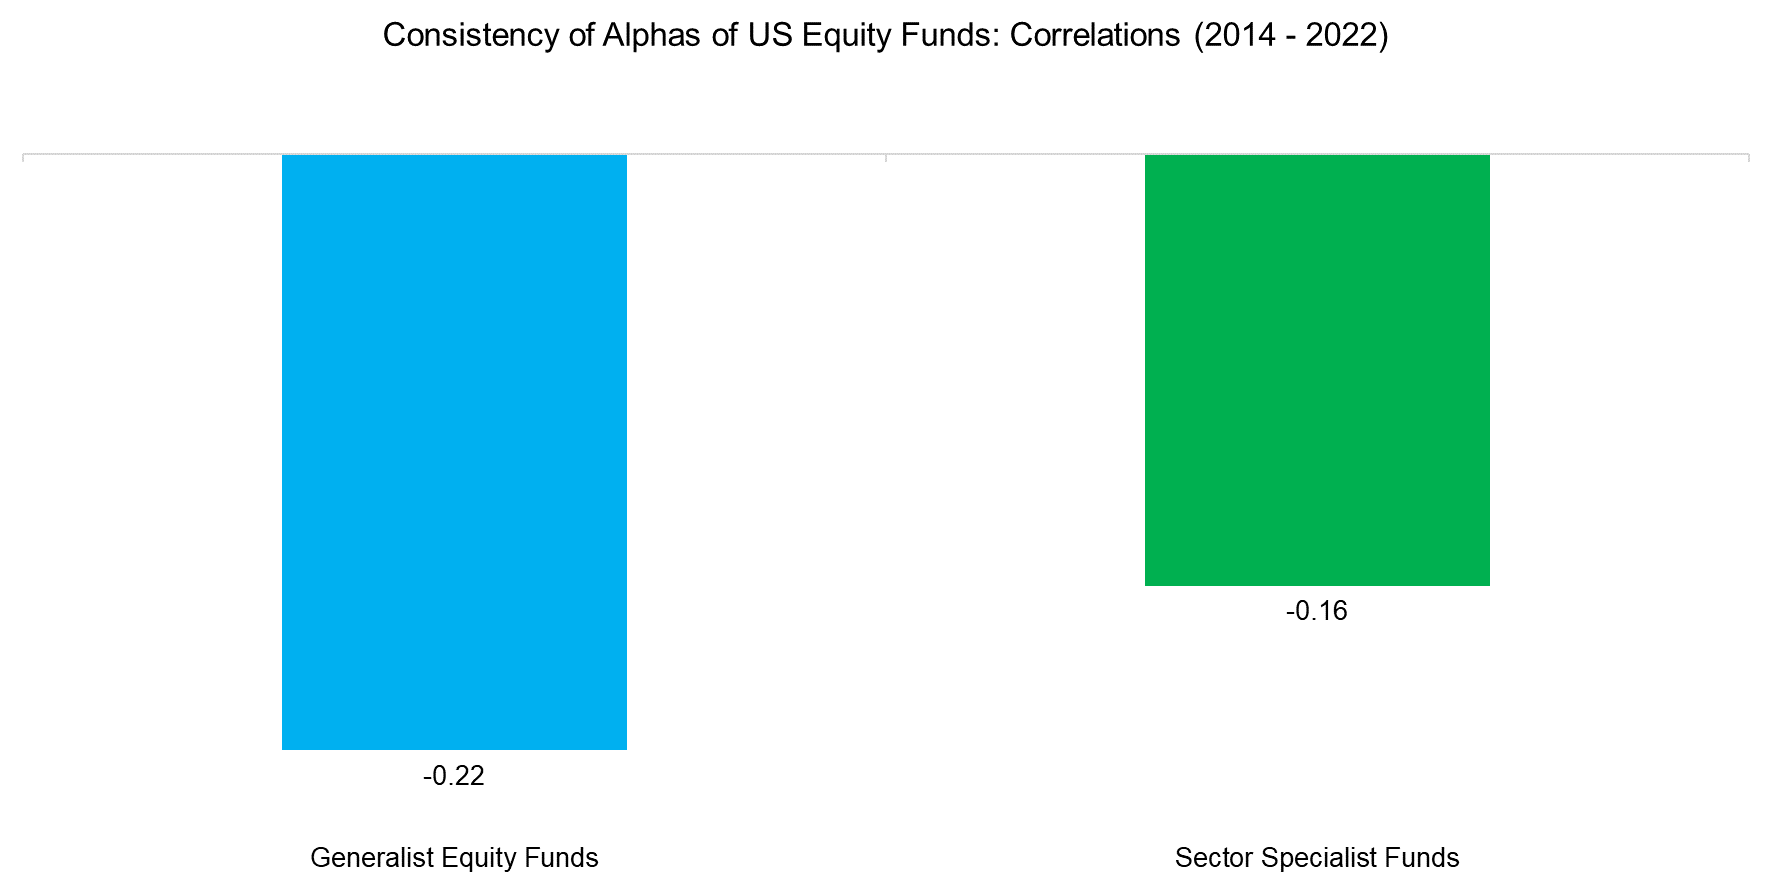 Consistency-of-Alphas-of-US-Equity-Funds-Correlations-2014-2022